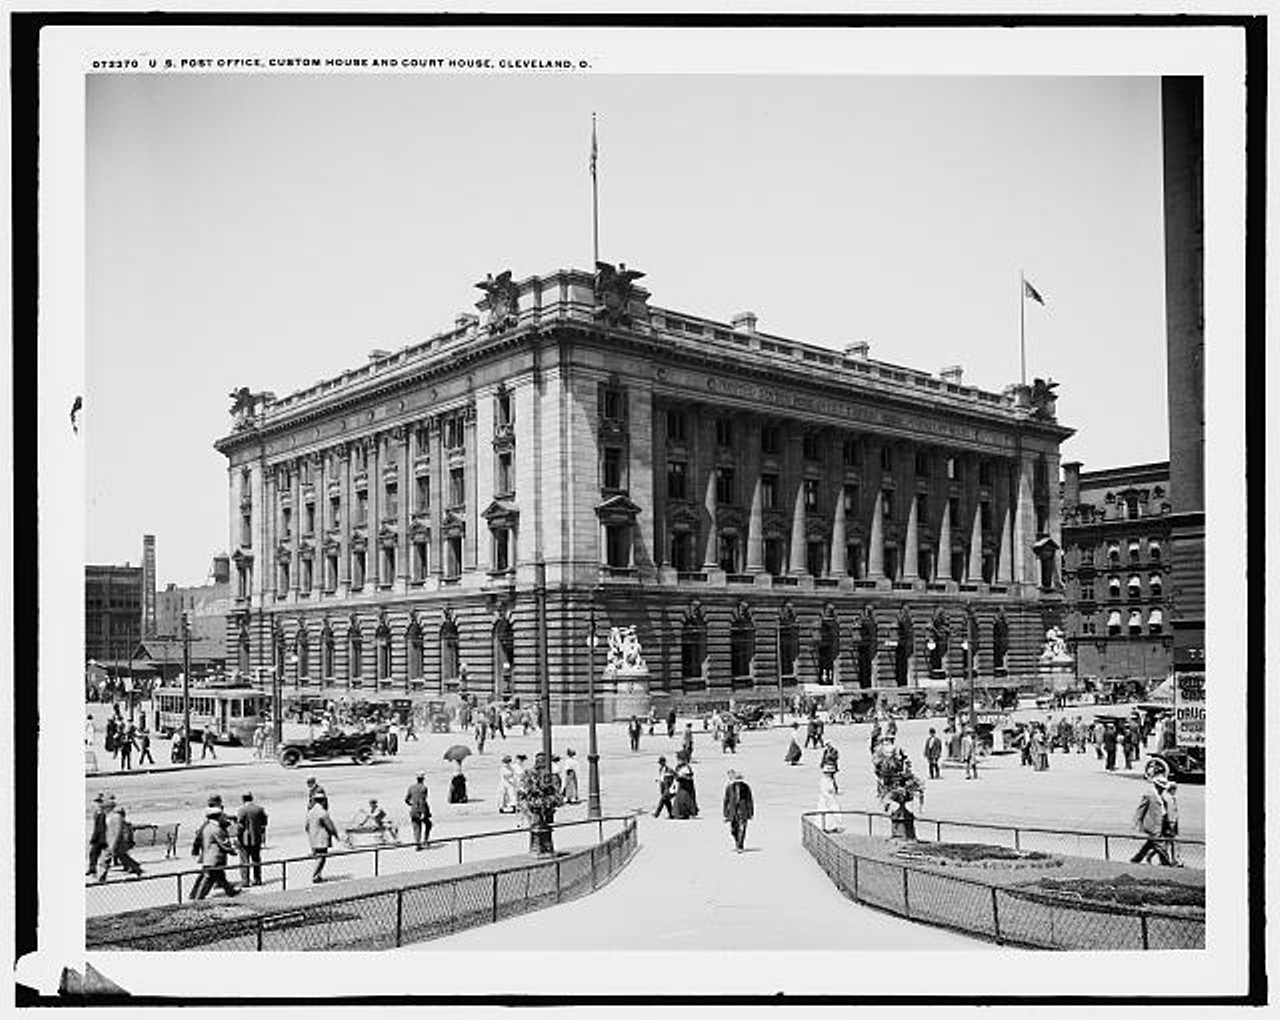 U.S. Post Office, between 1910 and 1920.